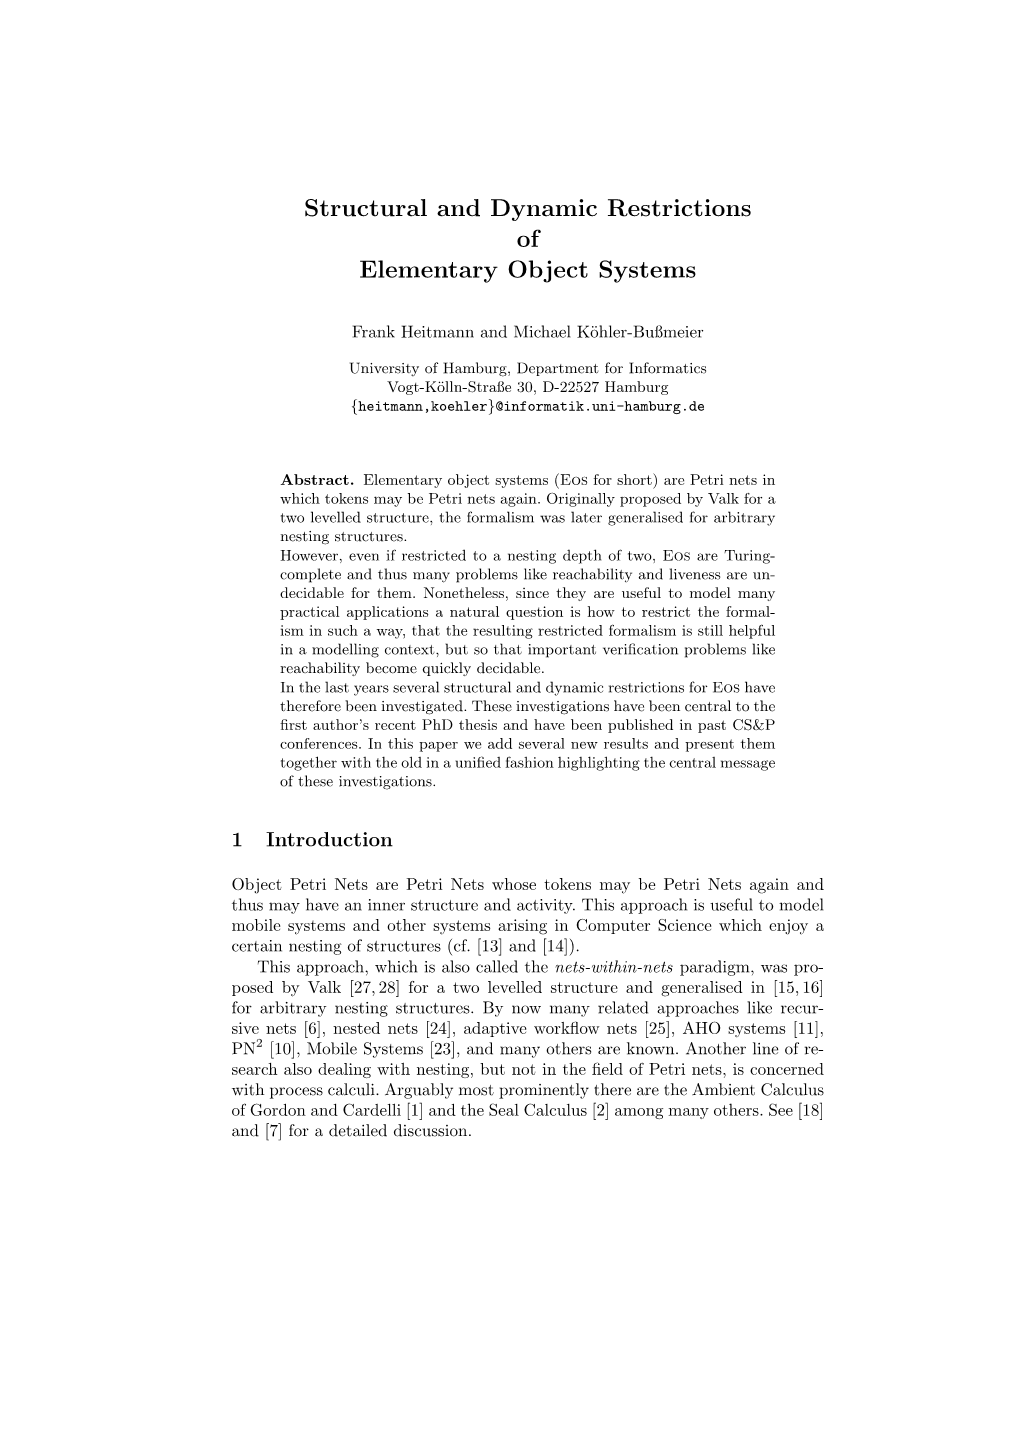 Structural and Dynamic Restrictions of Elementary Object Systems